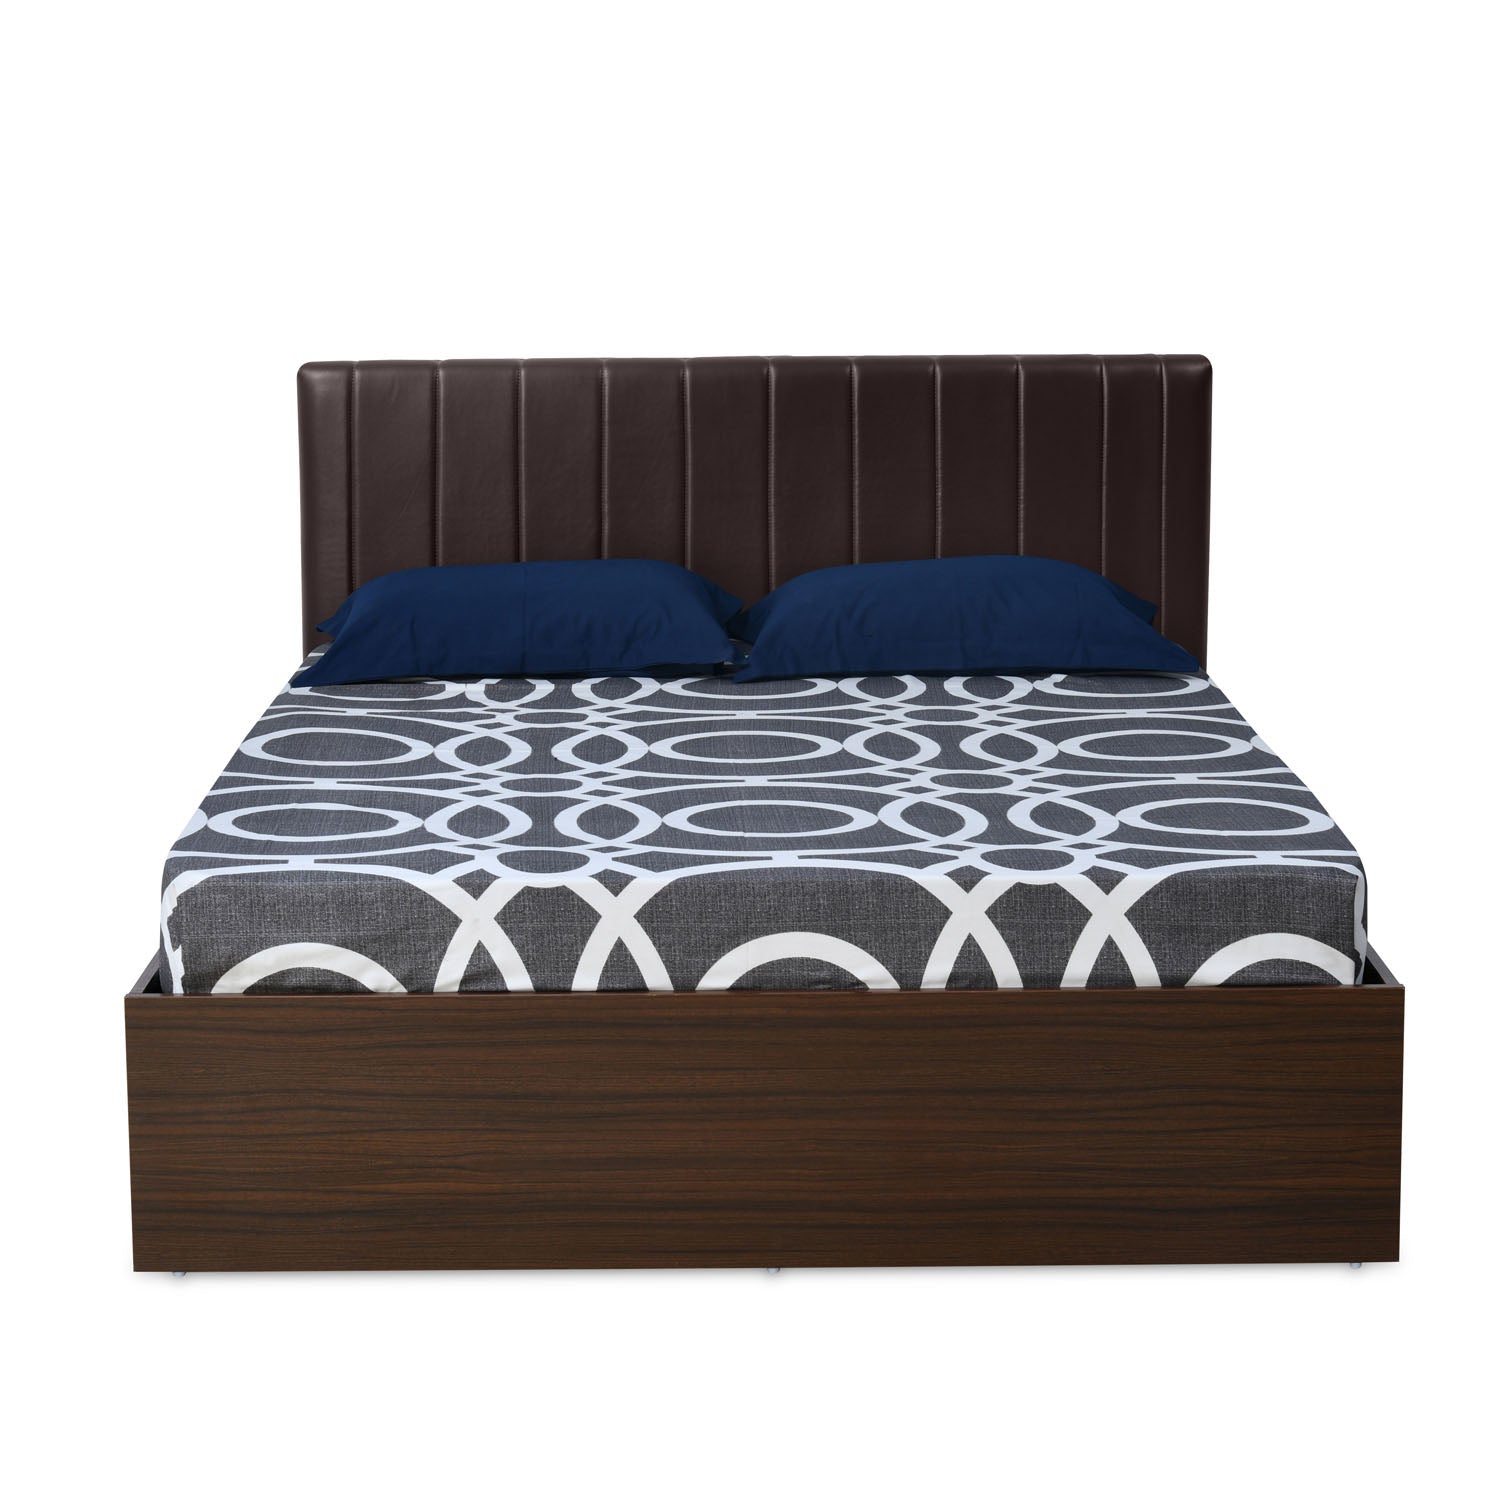 Fusion Upholstered Wall Mounted Headboard Engineered Wood King Bed with Box Storage (Walnut)